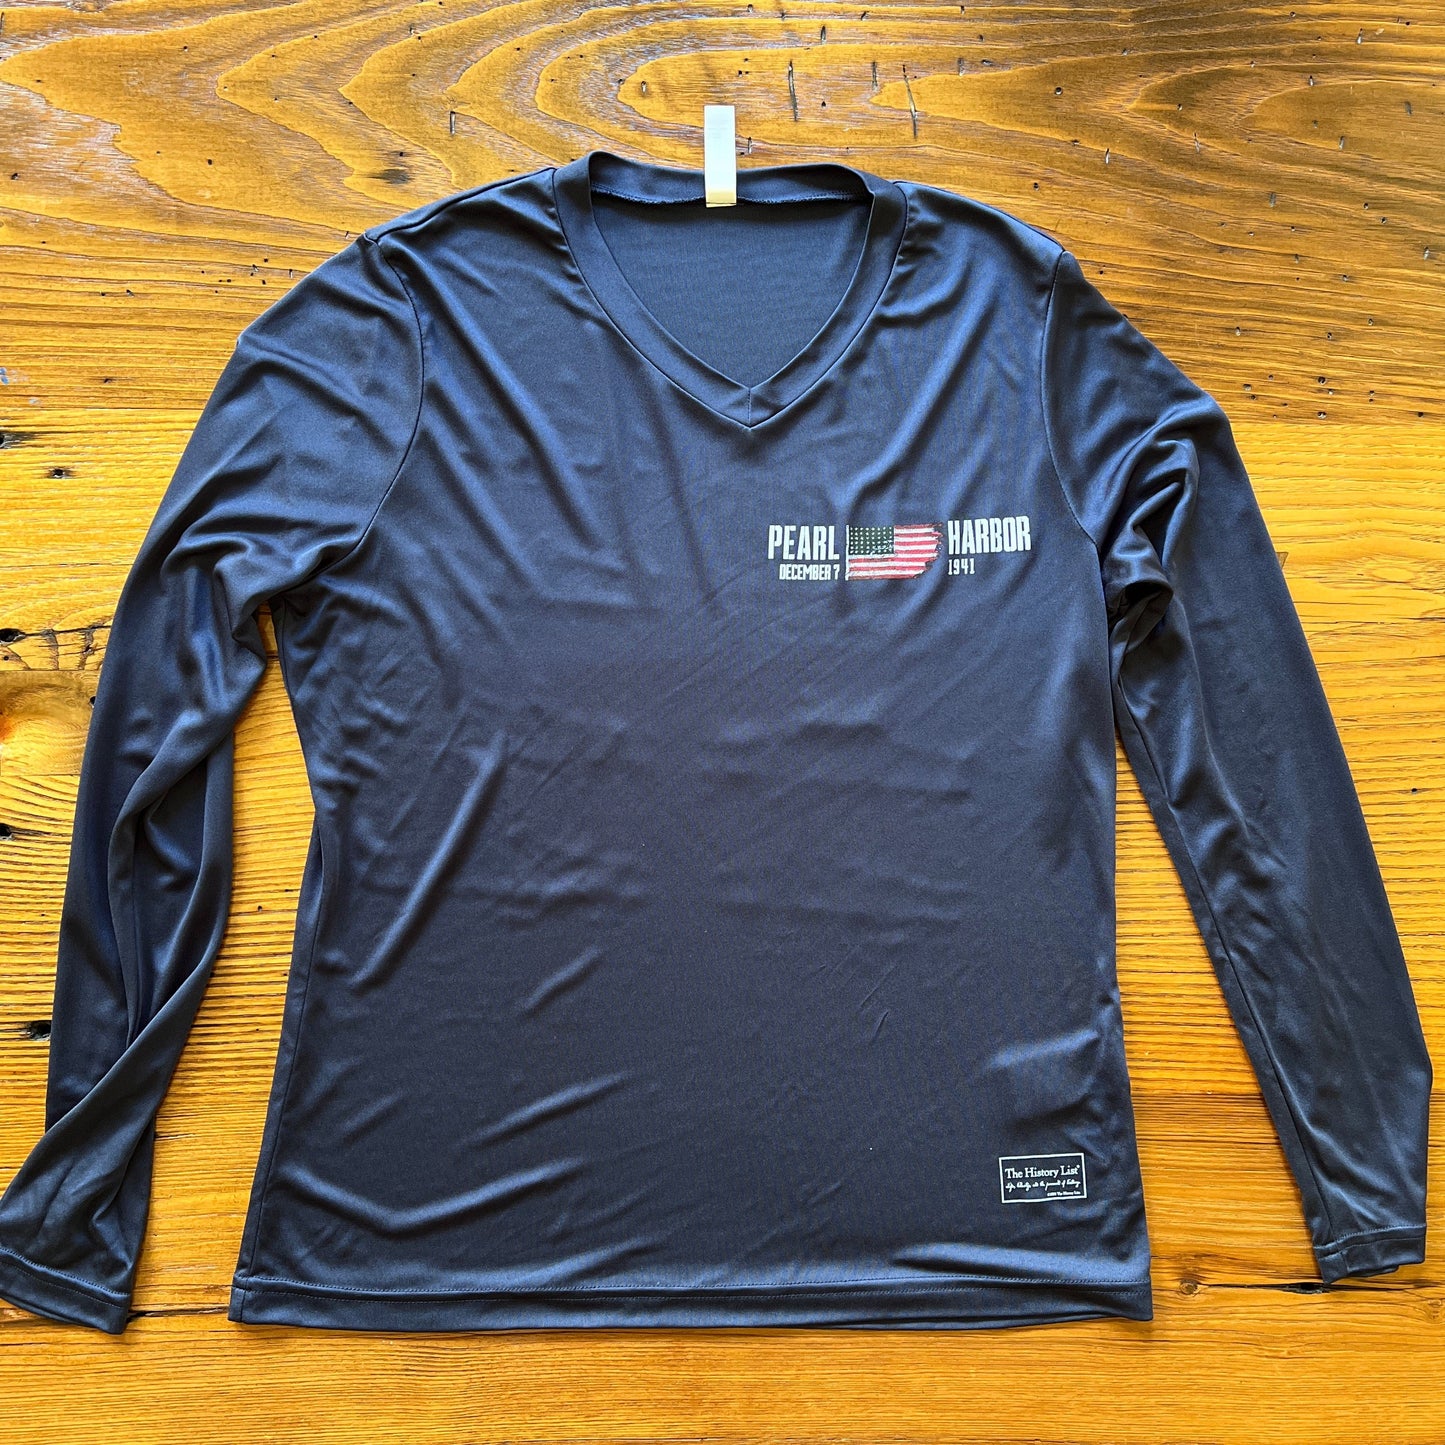 Women's Cut | Pearl Harbor “Battleship Row” on moisture-wicking 100% polyester interlock with SPF 40+ UV protection - Long-sleeve from the History List Store